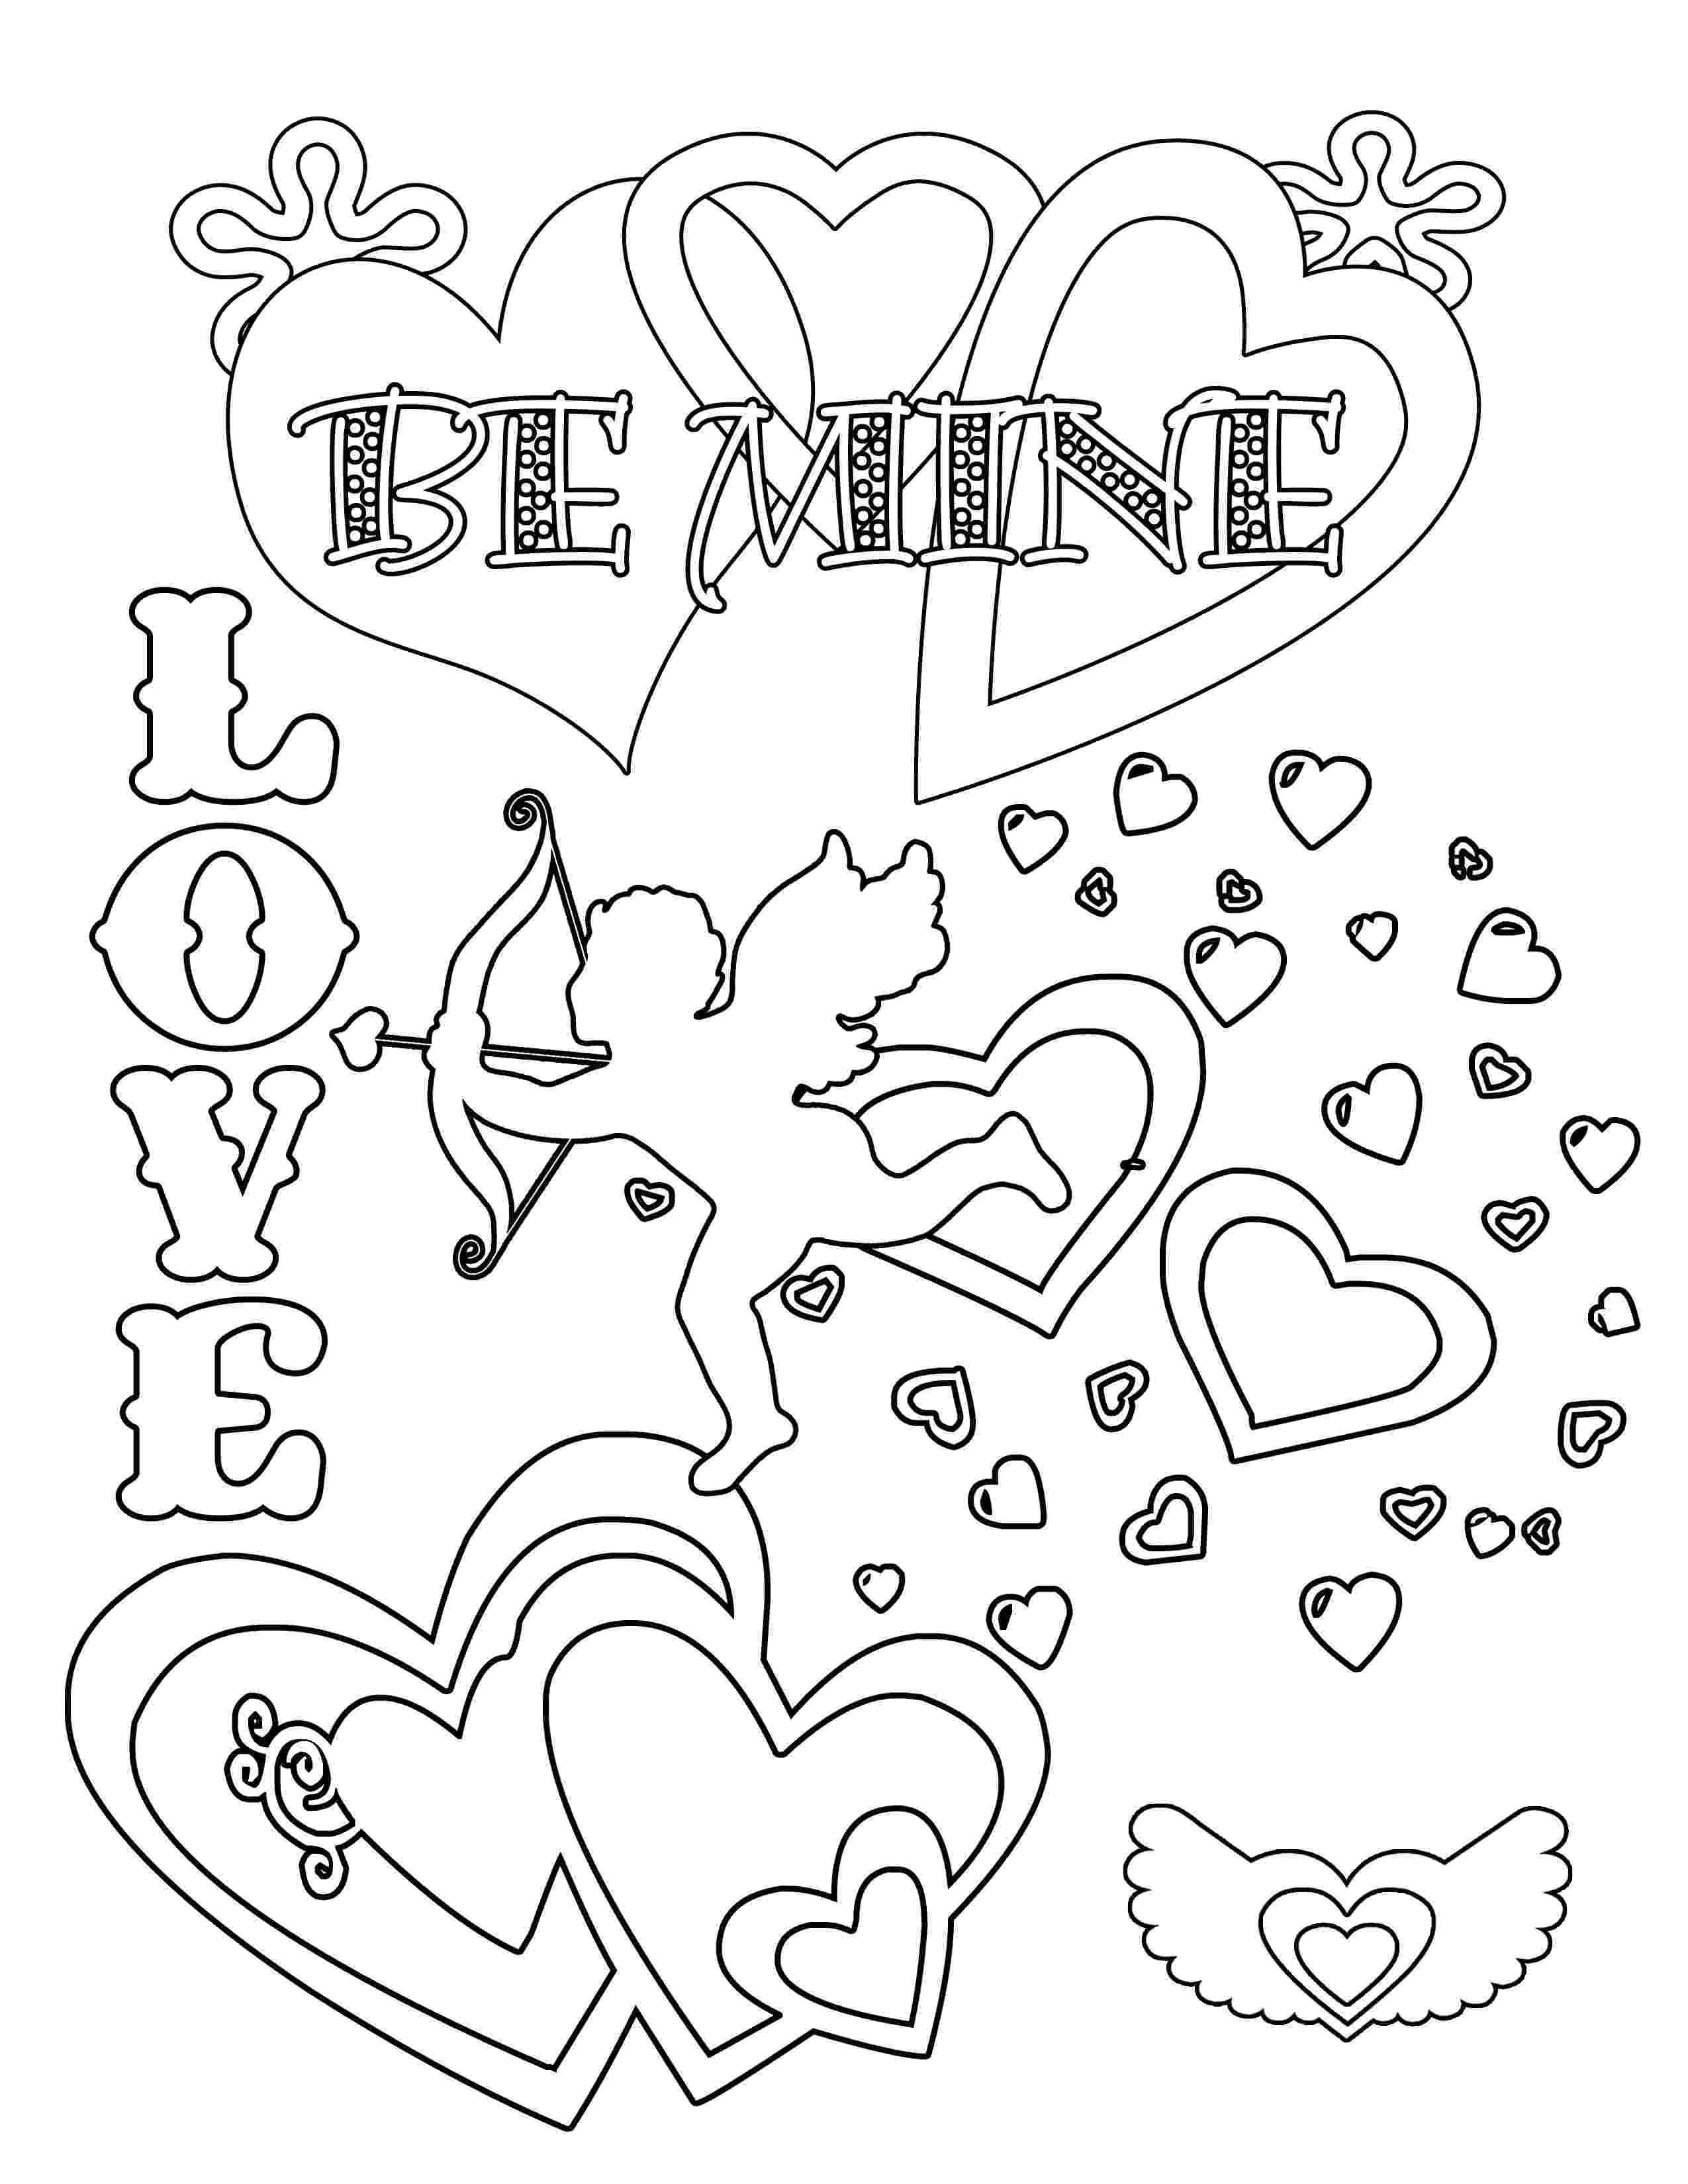 free printable valentines day coloring pages free printable valentine coloring pages paper trail design printable day pages valentines free coloring 